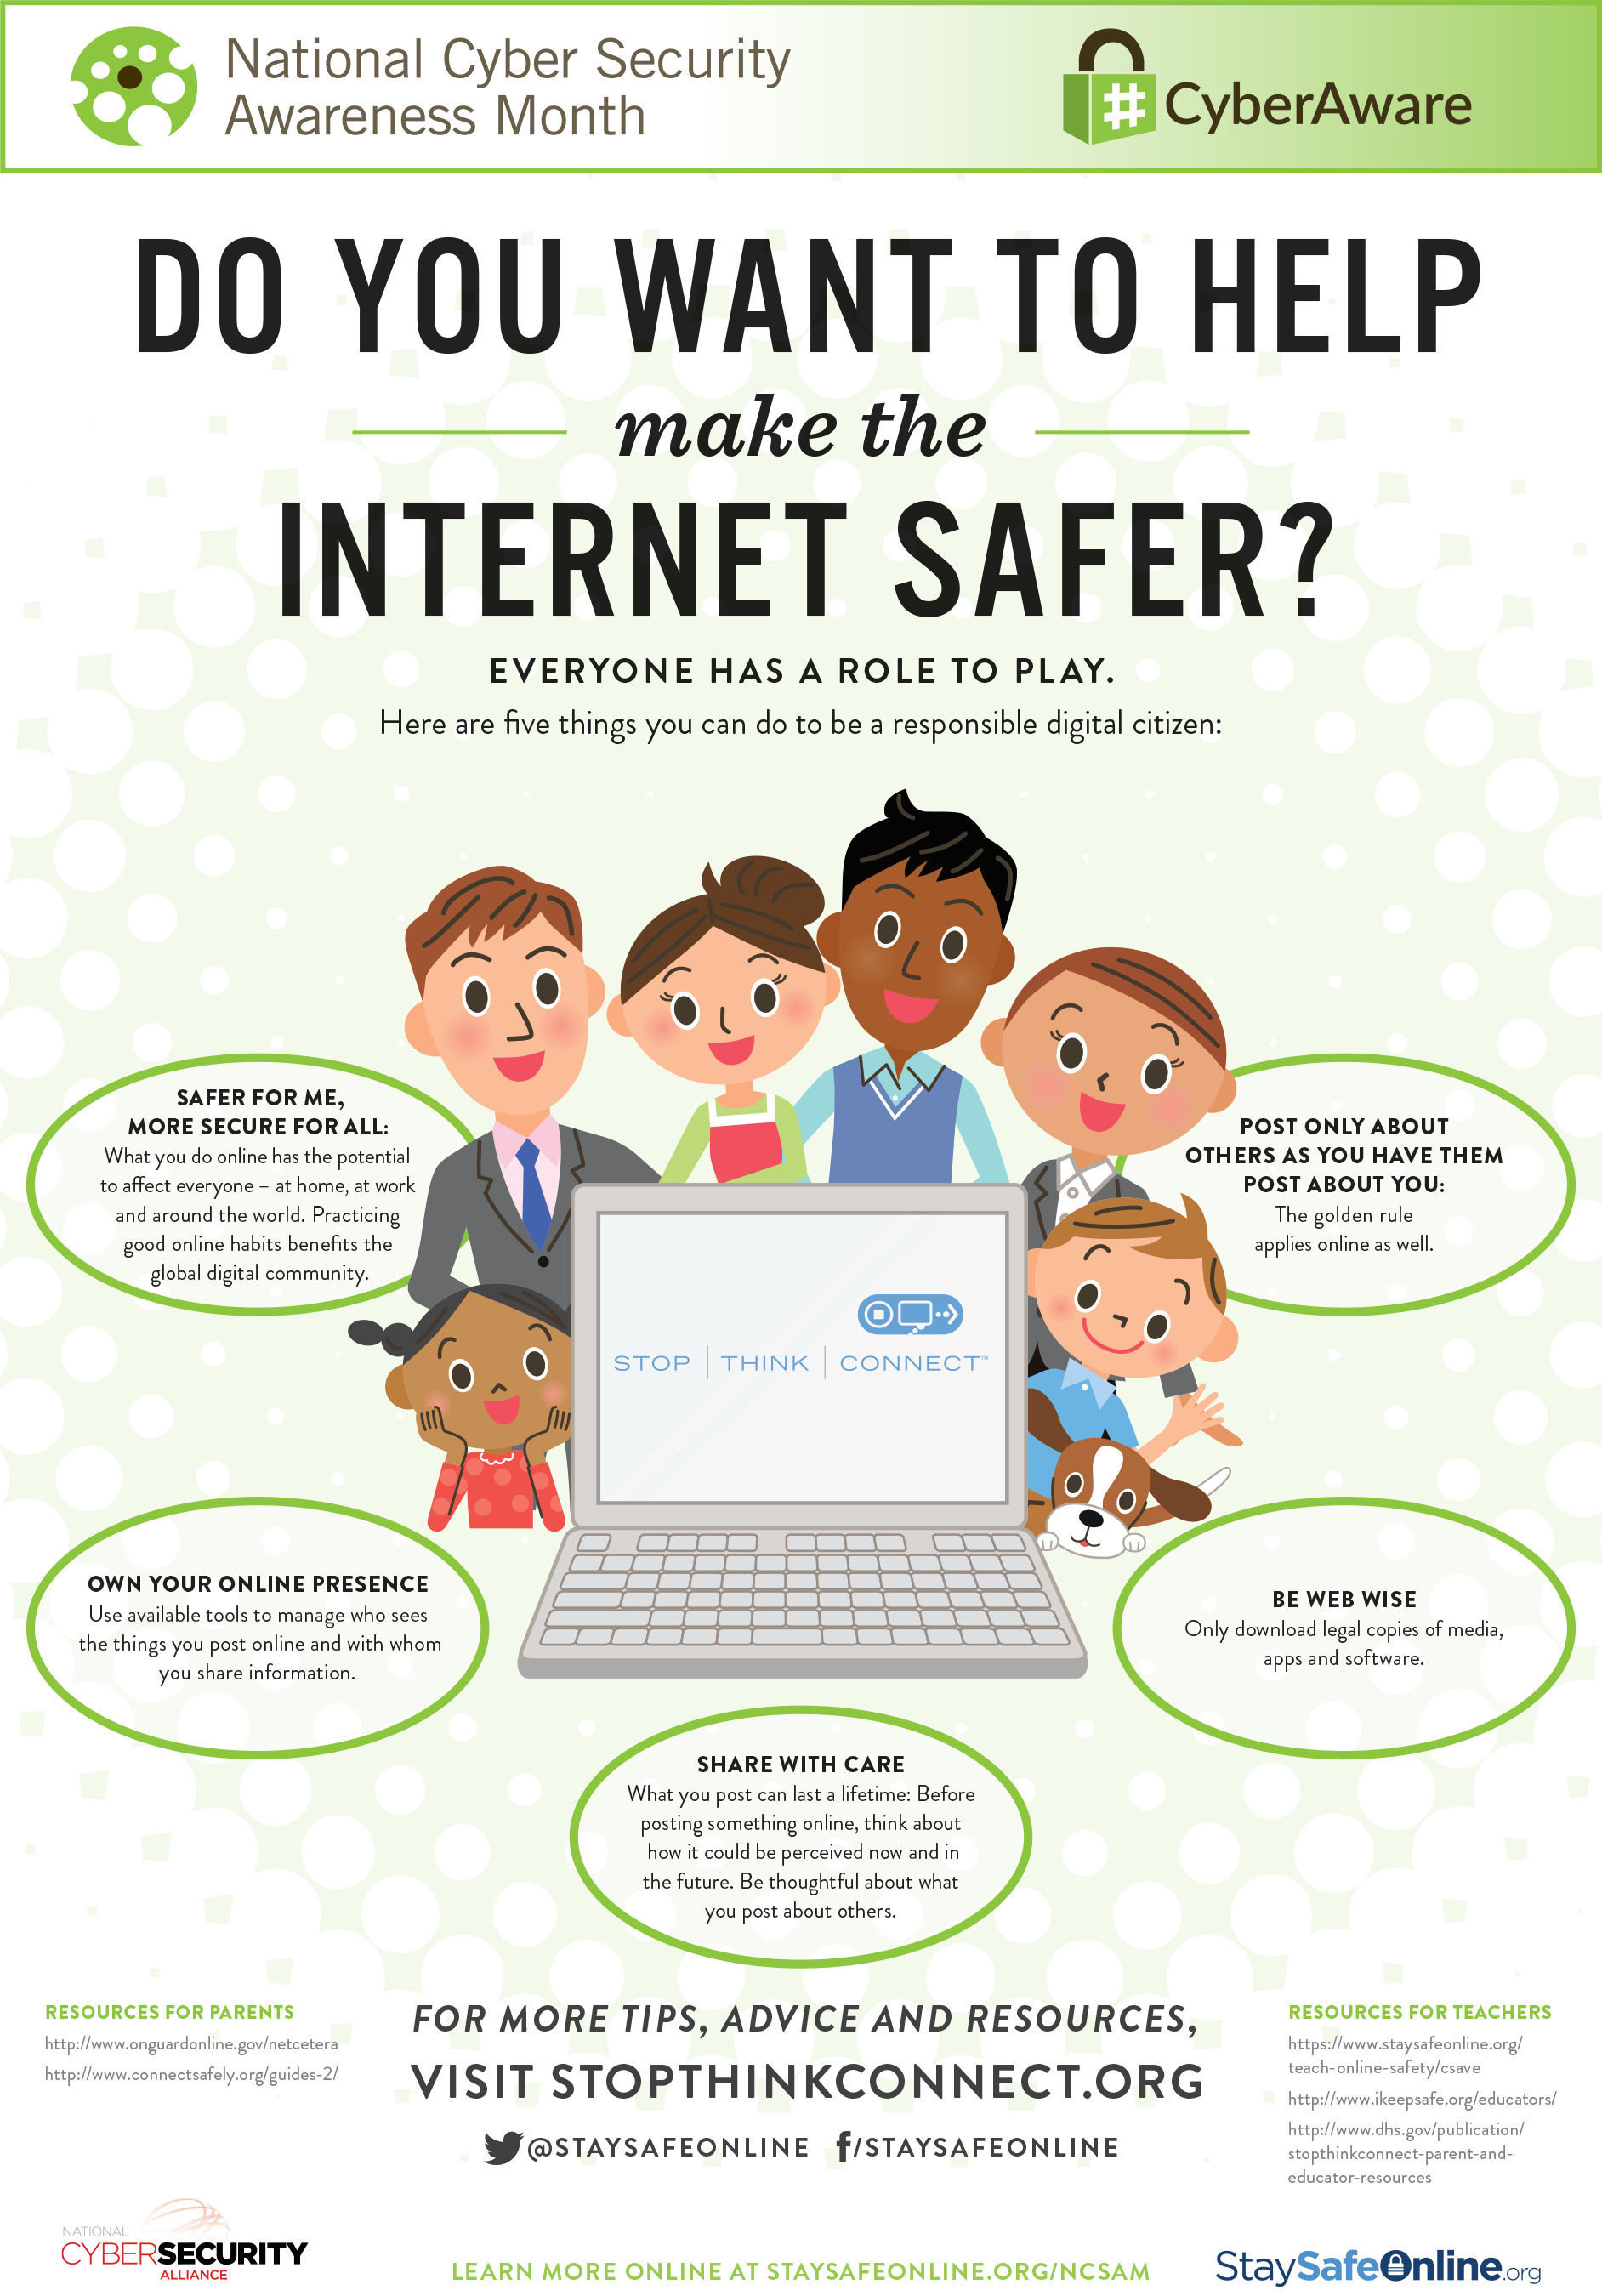 Do you want to help make the Internet Safer?